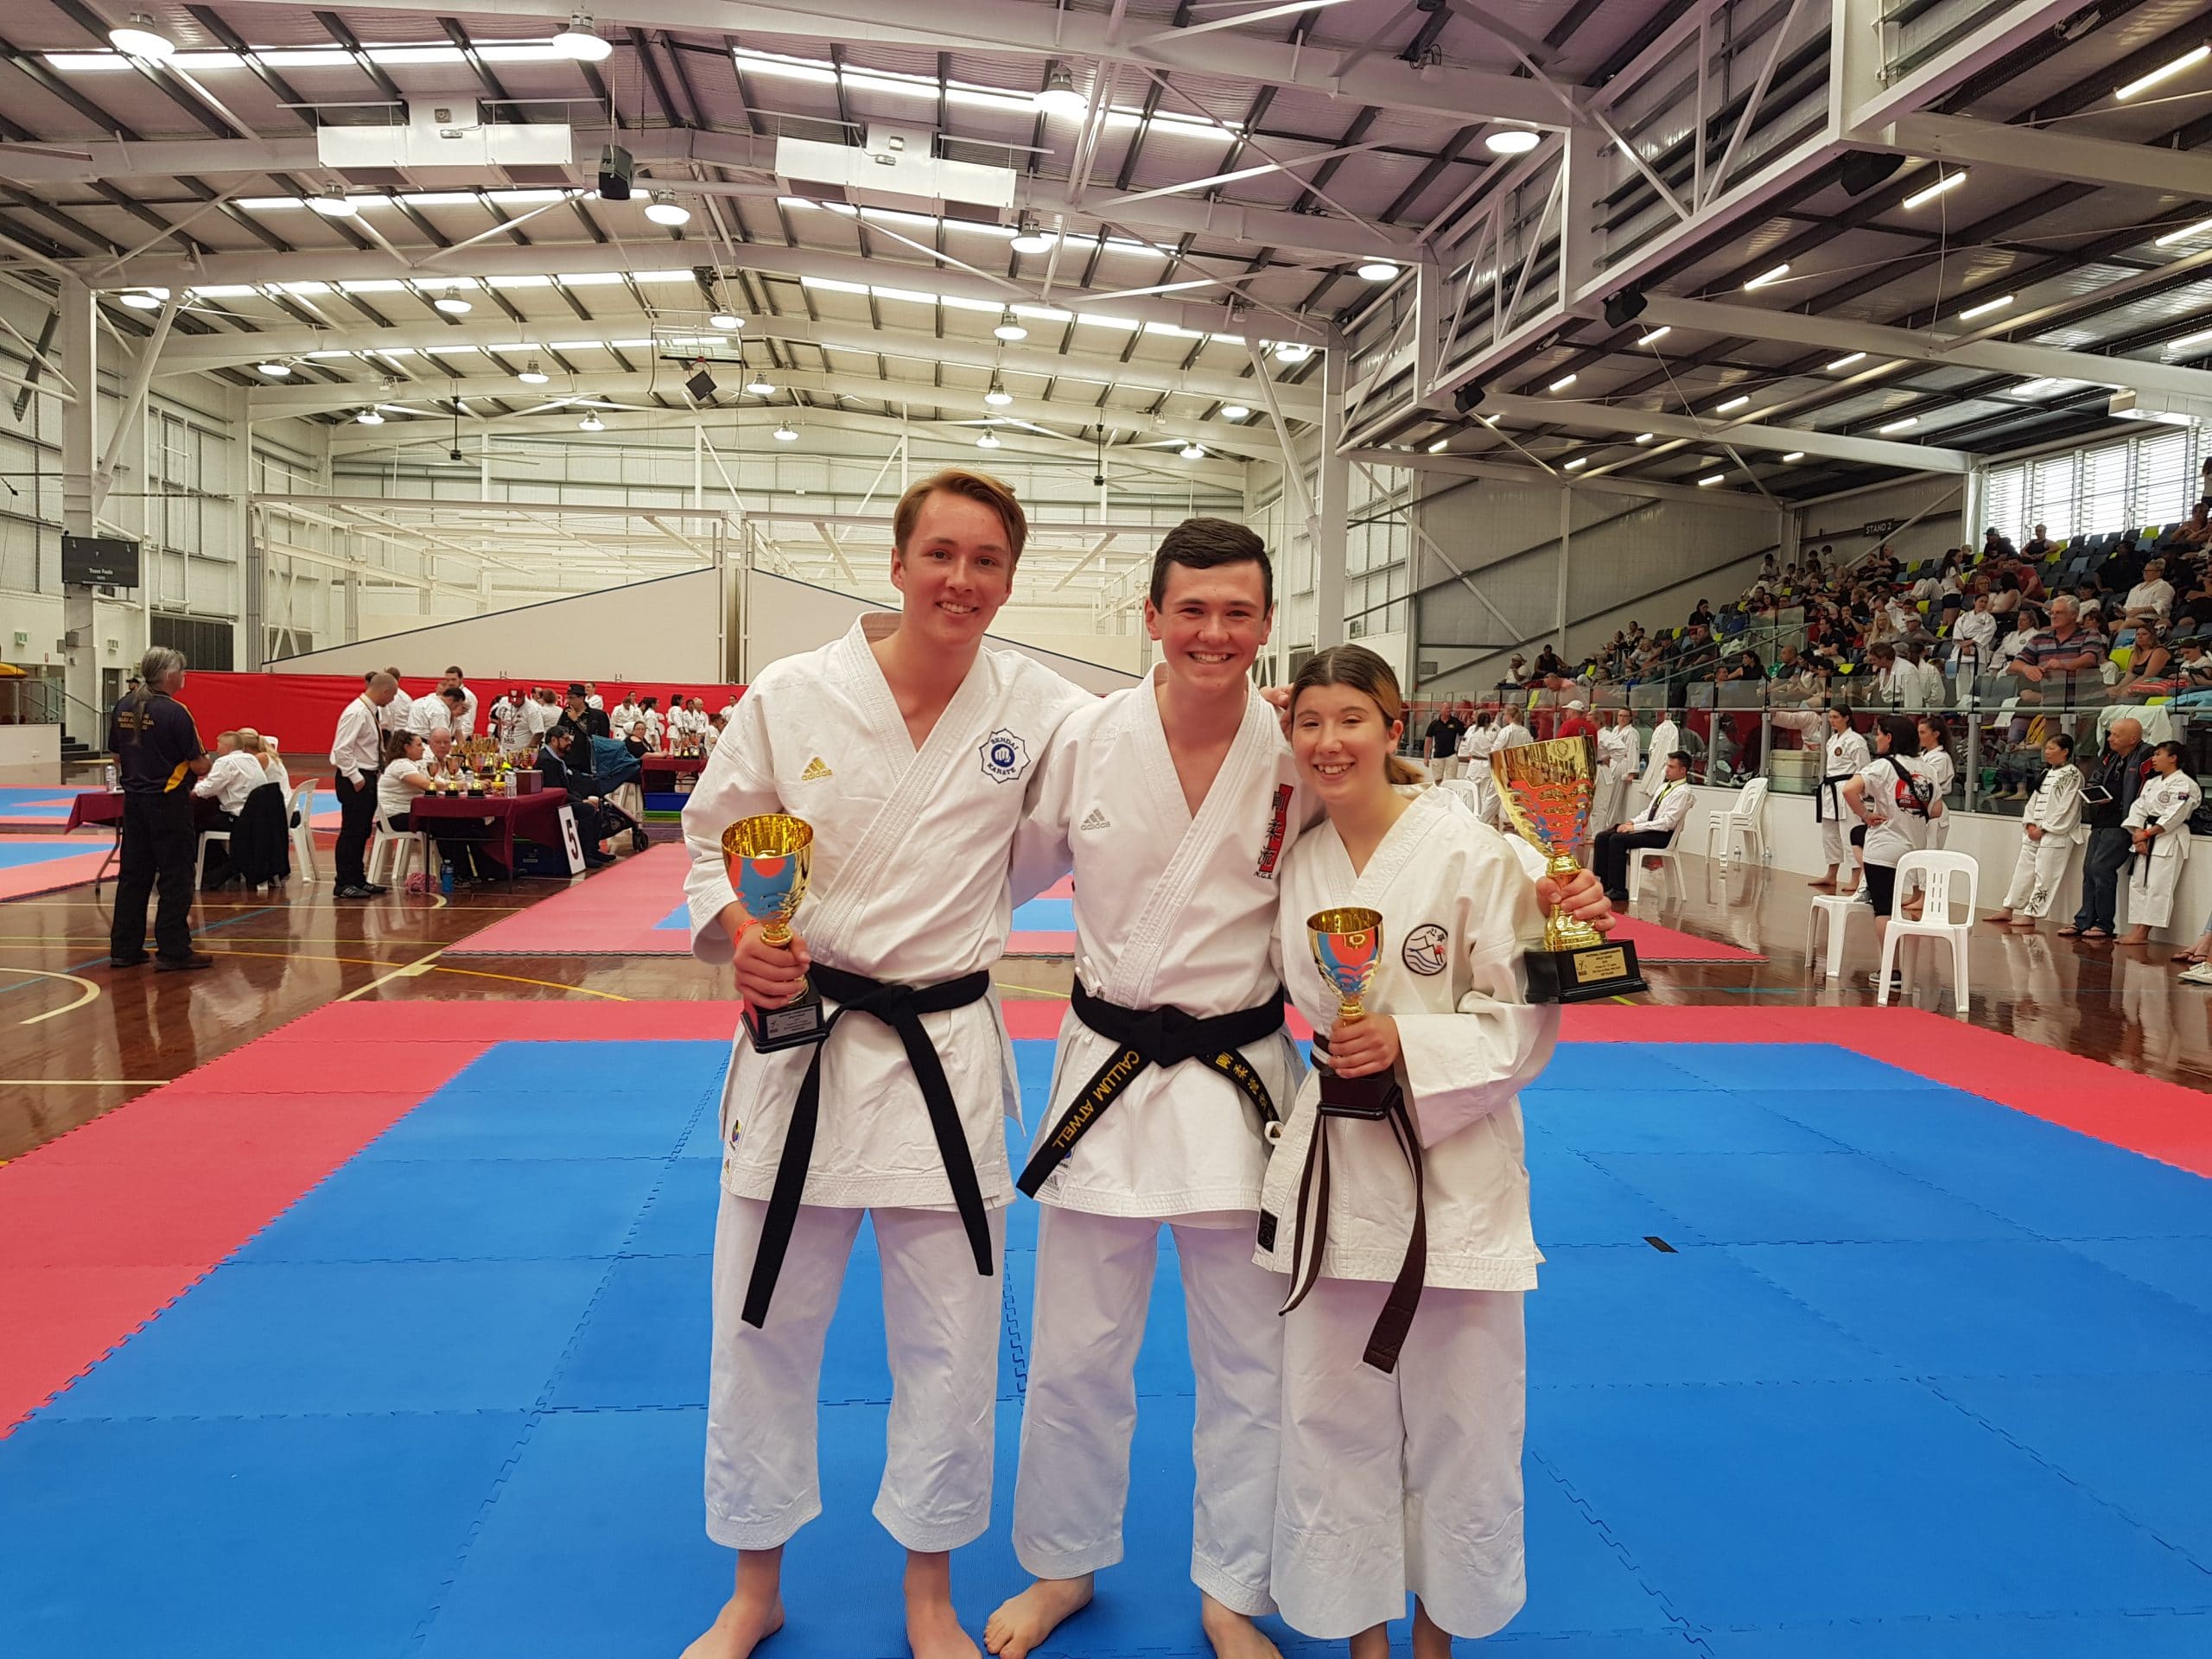 Local karate kid wins gold - The North Central Review